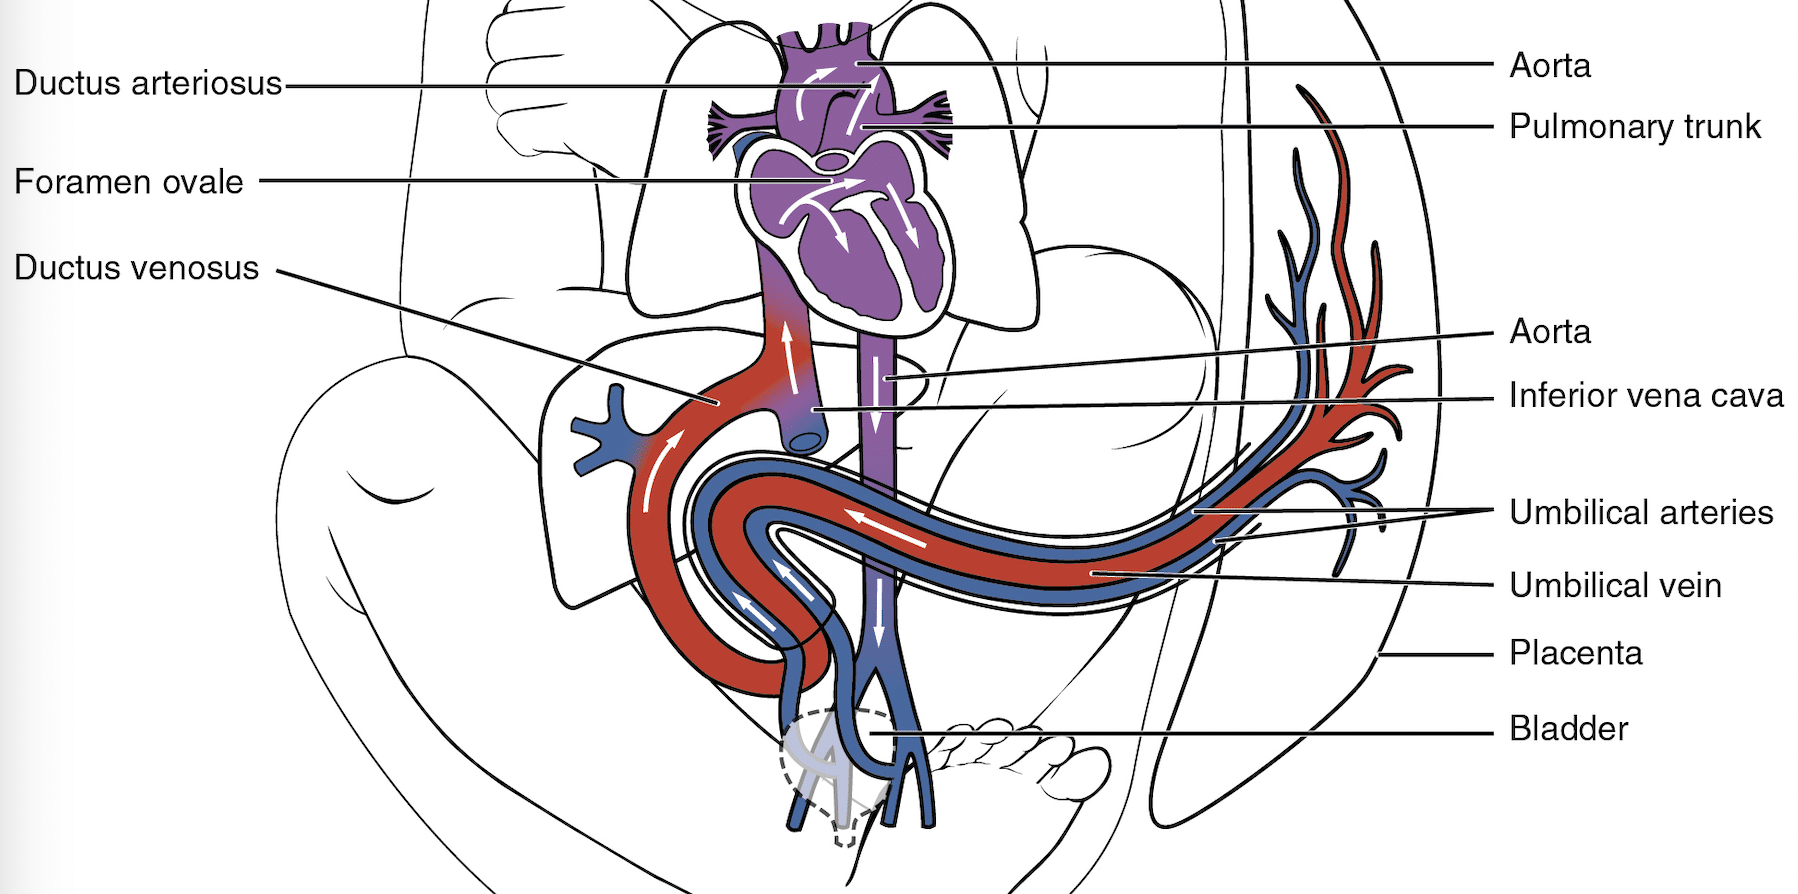 Diagram showing a child with a normal foetal circulation. Shows a direction of flow with oxygenated blood in red from the placenta through a single umbilical vein to the ductus venosus, inferior vena cava, heart, pulmonary trunk and aorta. It also shows some blood flow from the heart through the foramen ovale to the aorta. Blue deoxygenated blood is shown returning to the pairs umbilical veins to the placenta.